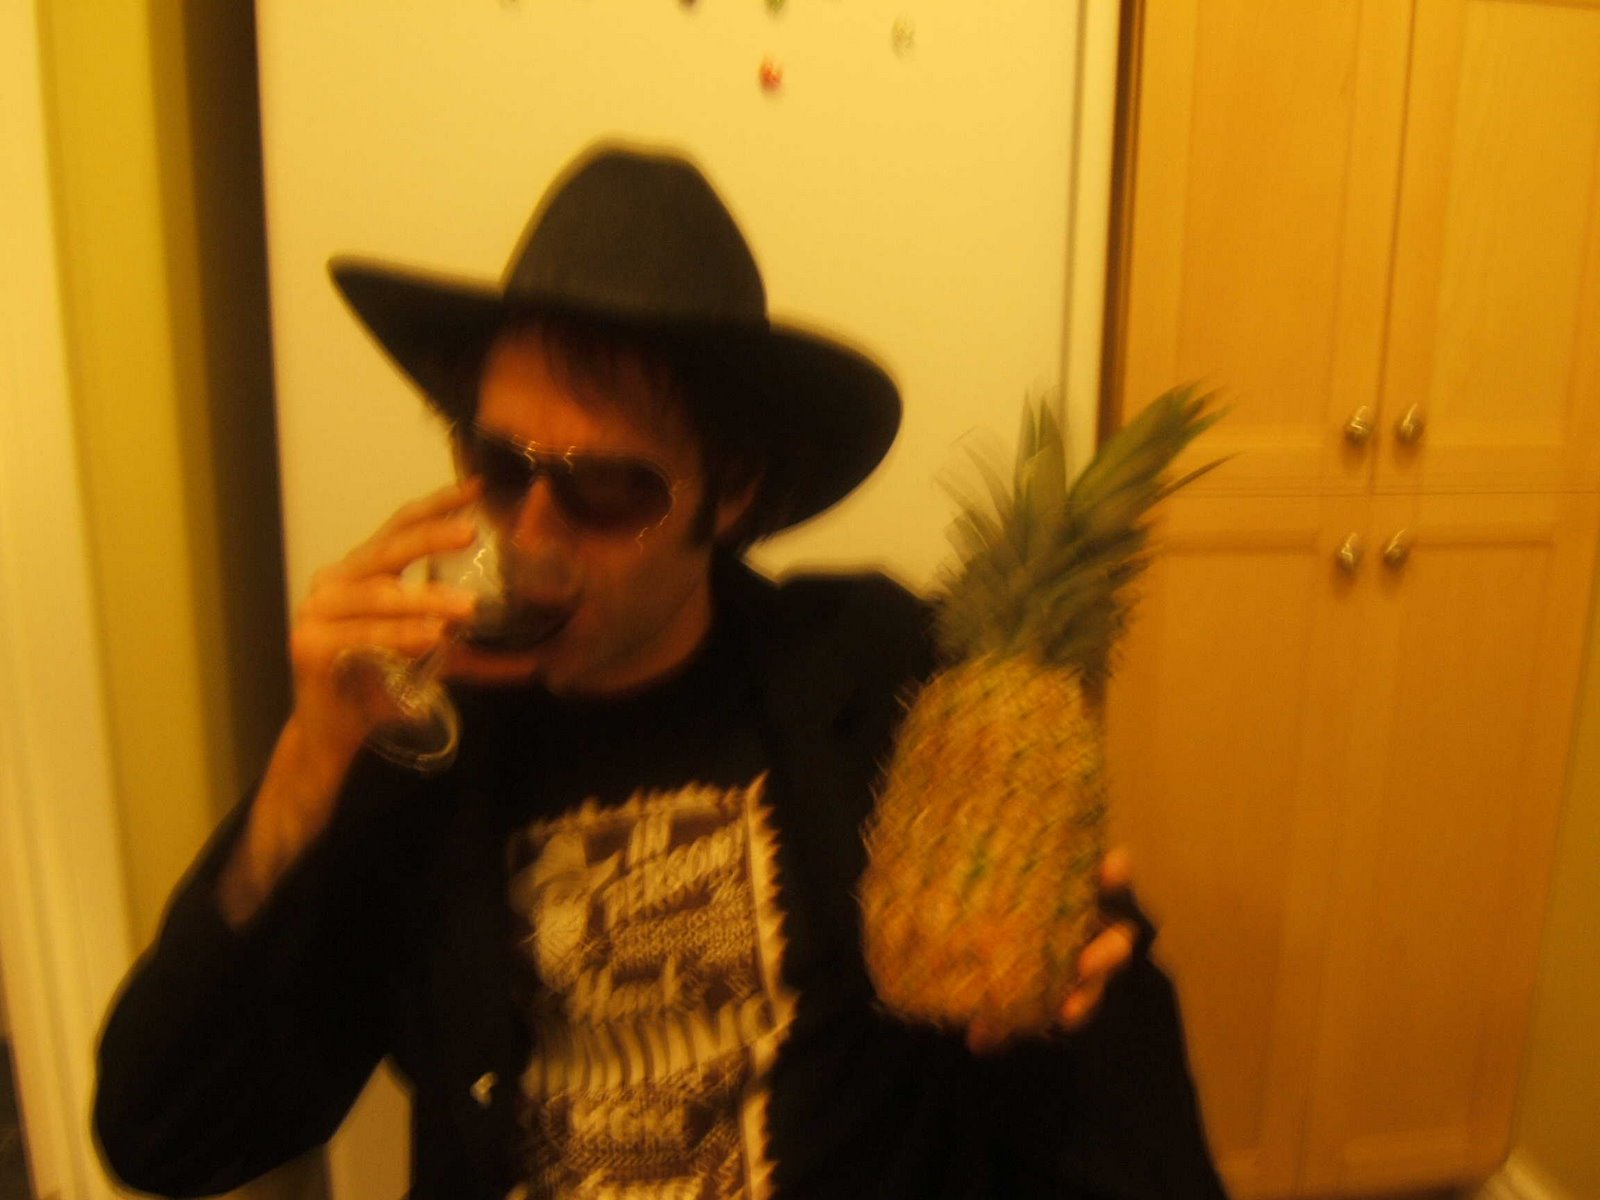 [hank+williams+and+pineapple+from+hell.JPG]